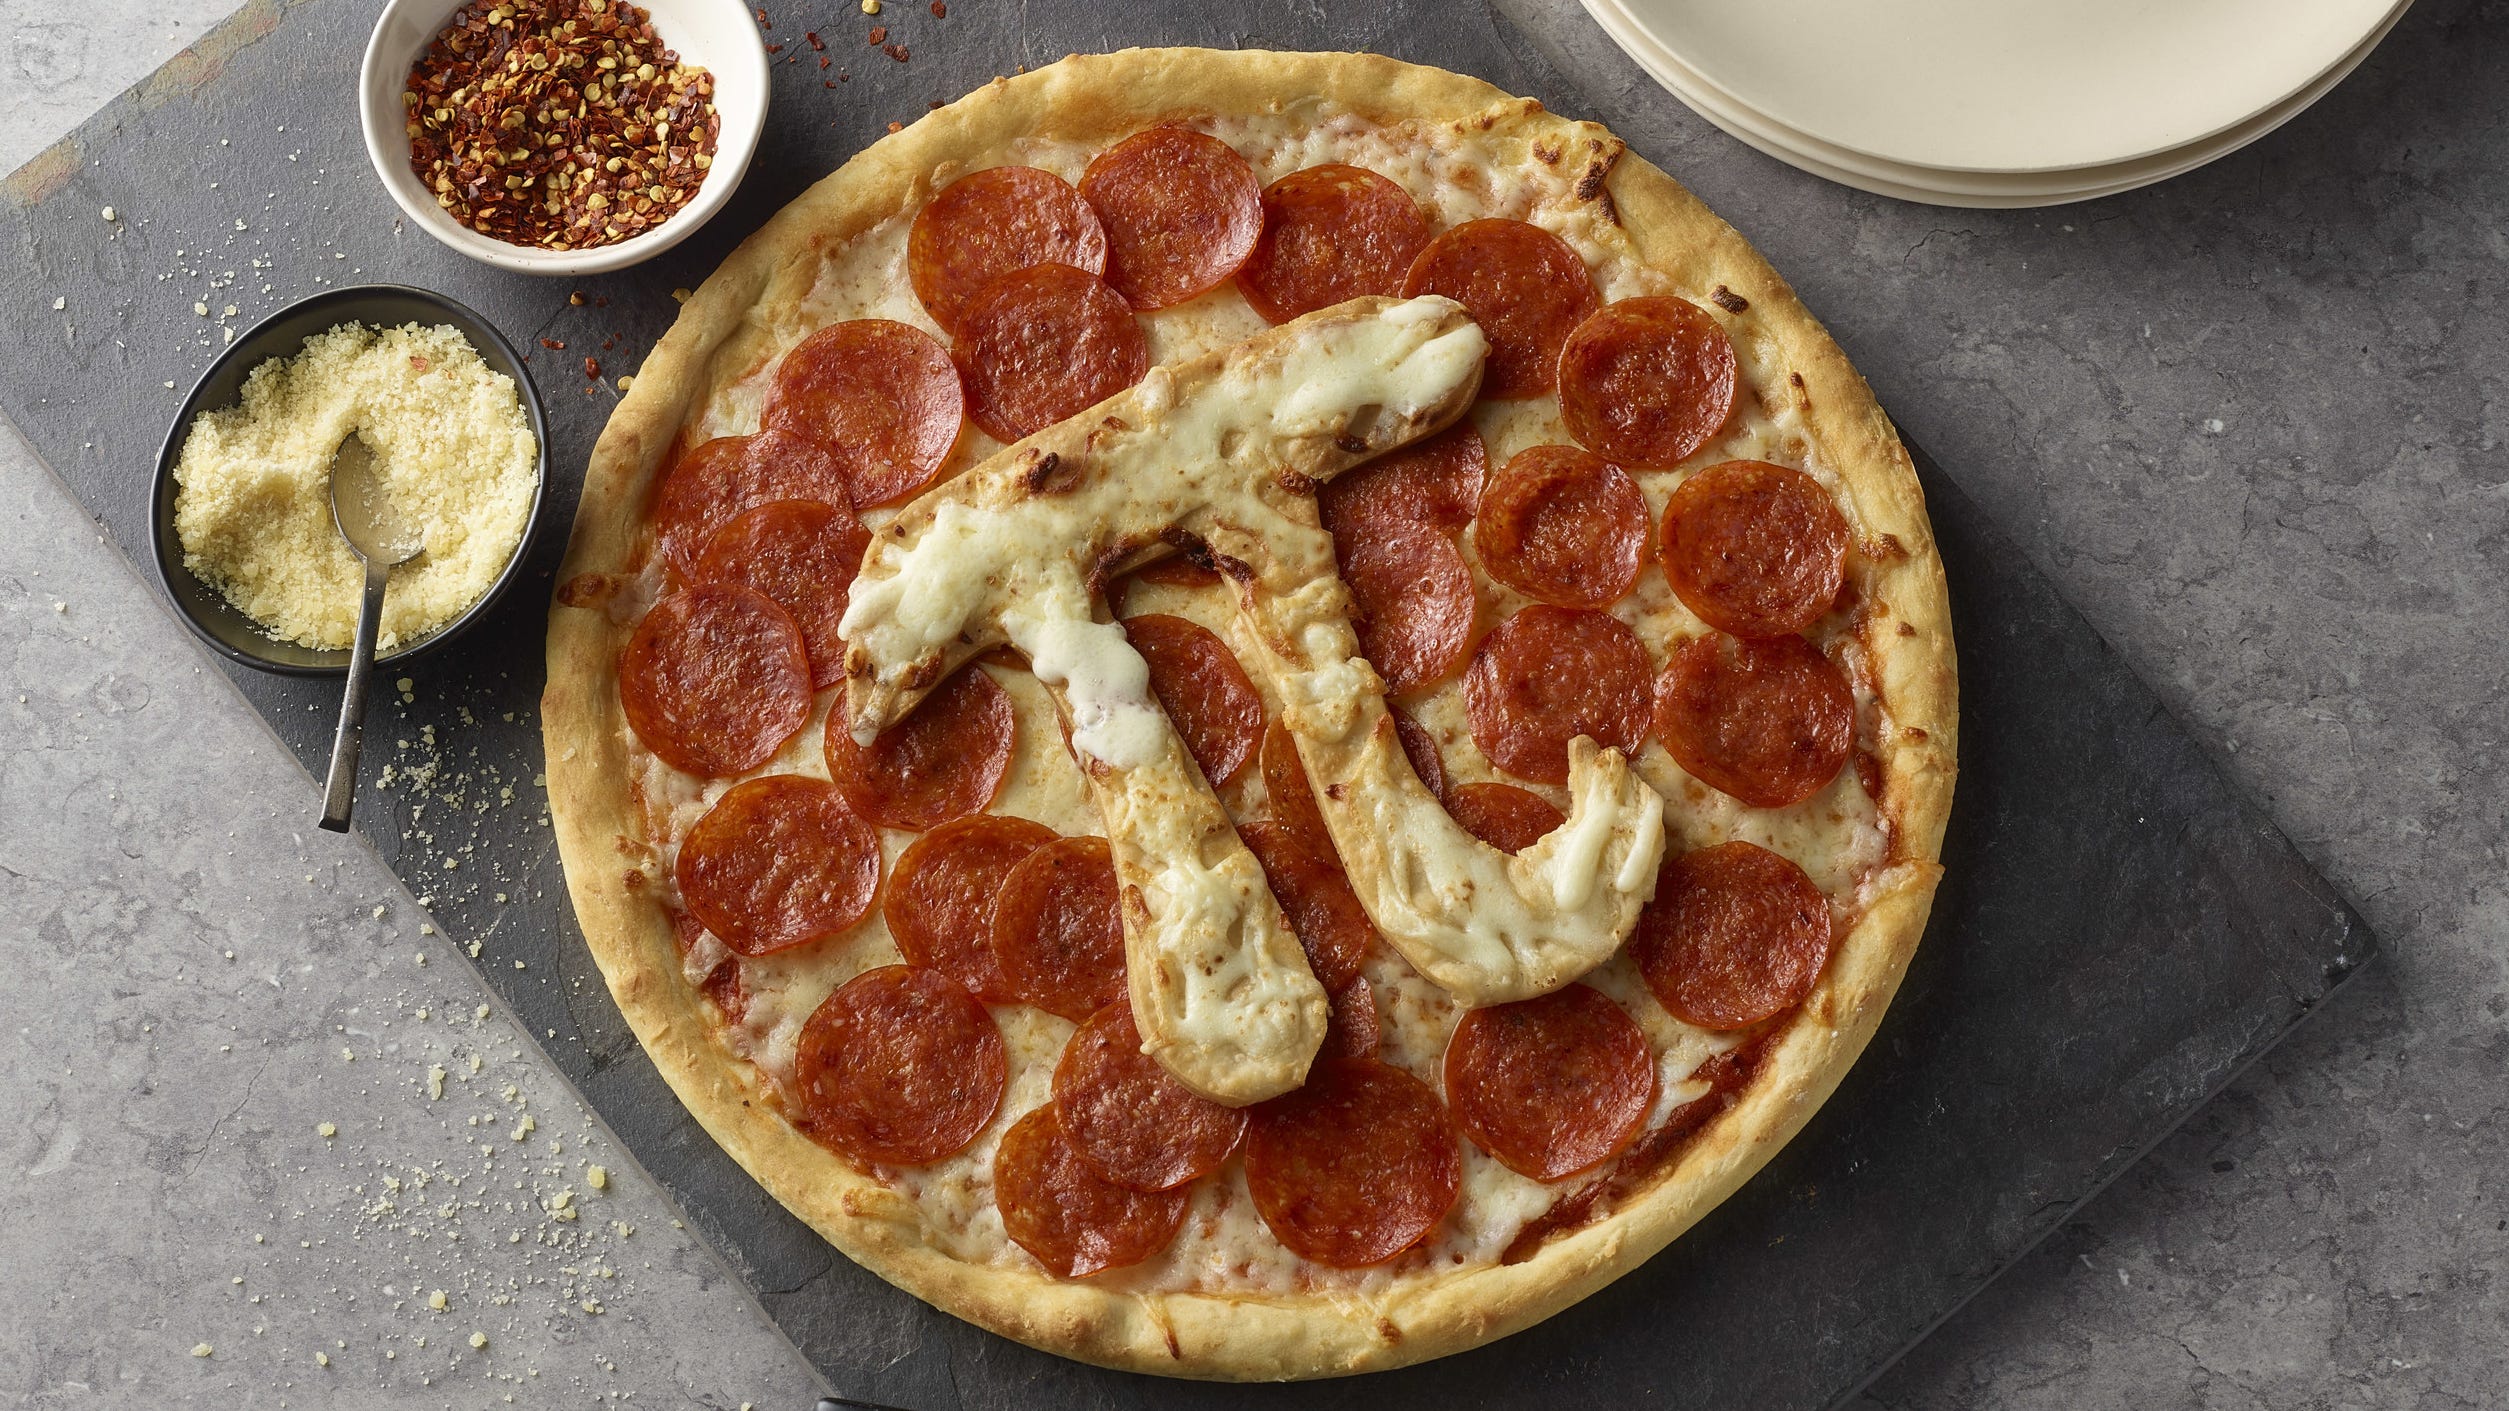 Pi Day 2021 deals near me Get 3.14 pizza, discounts, freebies Sunday